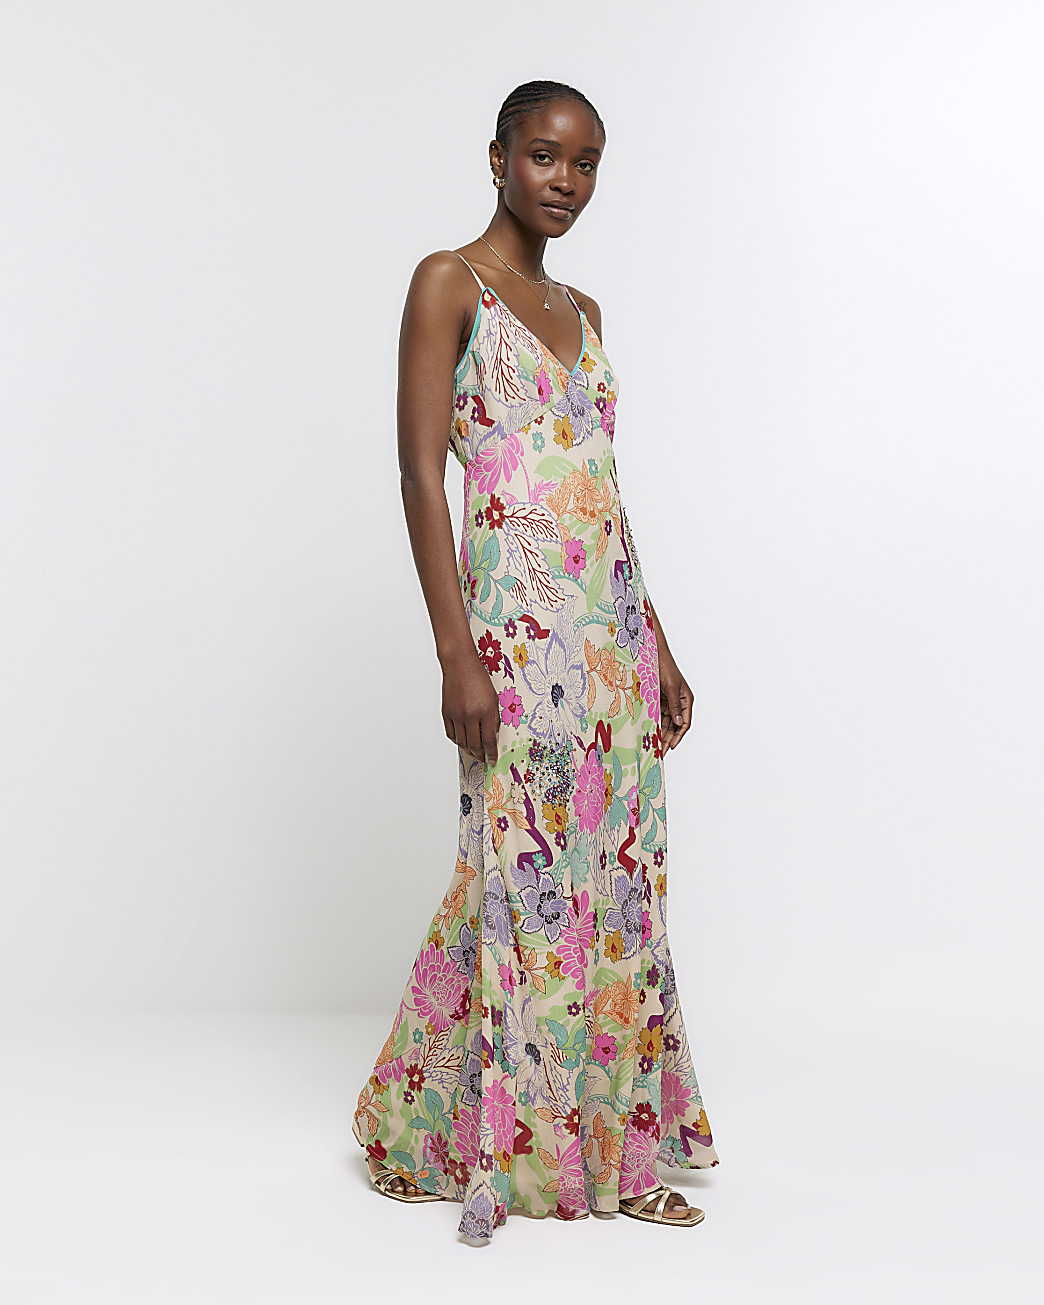 Lets look at the perfect floral maxi dresses for any wedding with our guide. Explore elegant, sustainable, and stylish options to make a stunning impression as a wedding guest. Floral Maxi Dress | Floral Maxi Dresses | Floral Maxie Dress | Florals Maxi | Floral Maxi Dress Summer | Floral Maxi Dressed | Floral Maxi Dress For Wedding | Floral Maxi Dresses For Weddings | Long Summer | Floral Outfit | Maxi Dress | Floral Dress | Floral Maxi Dresses With Sleeves | Floral Maxi Dress With Sleeves